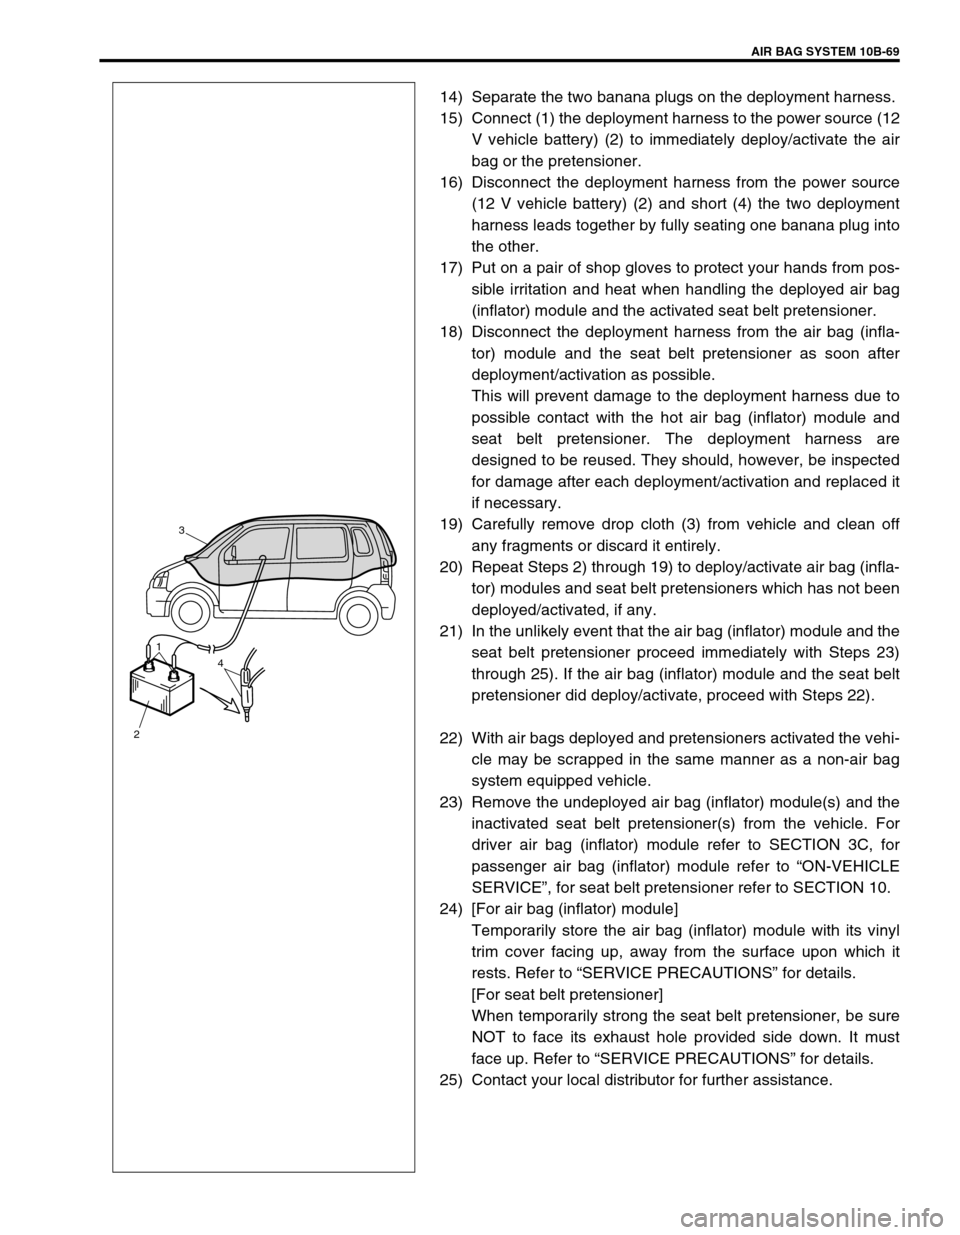 SUZUKI SWIFT 2000 1.G Transmission Service Workshop Manual AIR BAG SYSTEM 10B-69
14) Separate the two banana plugs on the deployment harness.
15) Connect (1) the deployment harness to the power source (12
V vehicle battery) (2) to immediately deploy/activate 